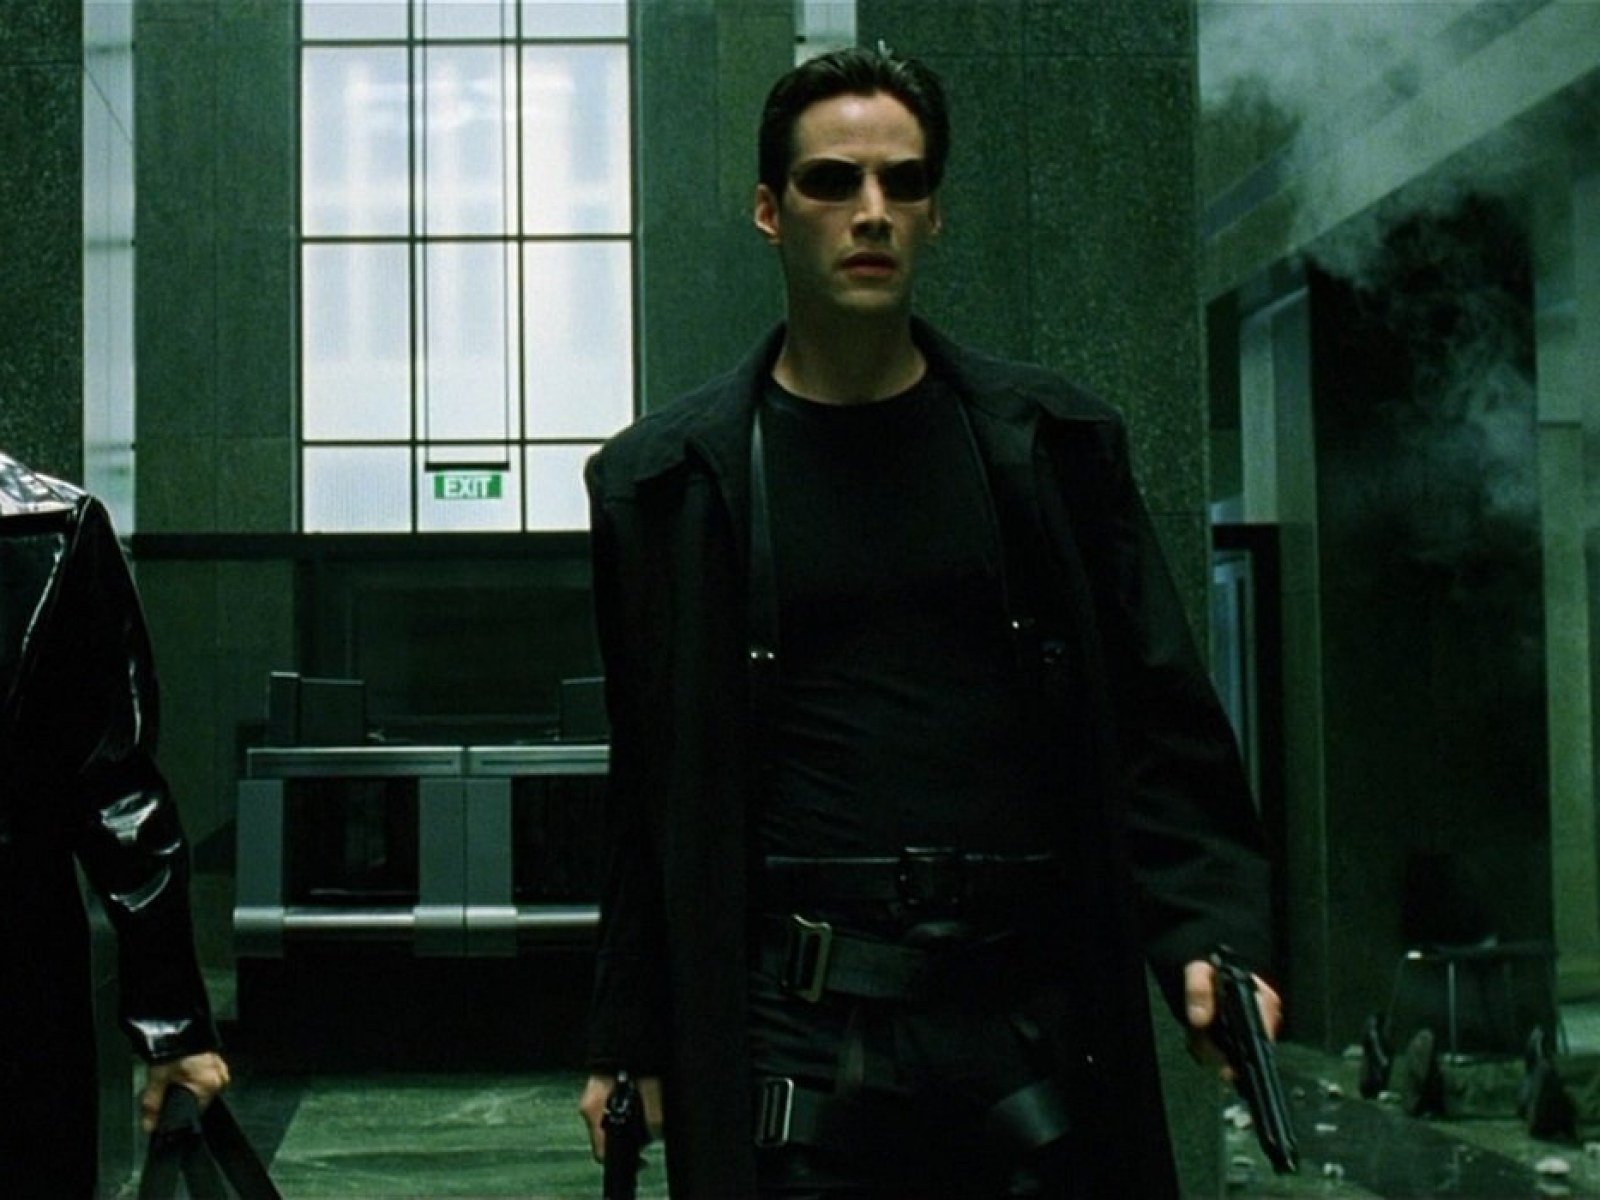 The Matrix 4 will star Keanu Reeves and Carrie-Anne Moss